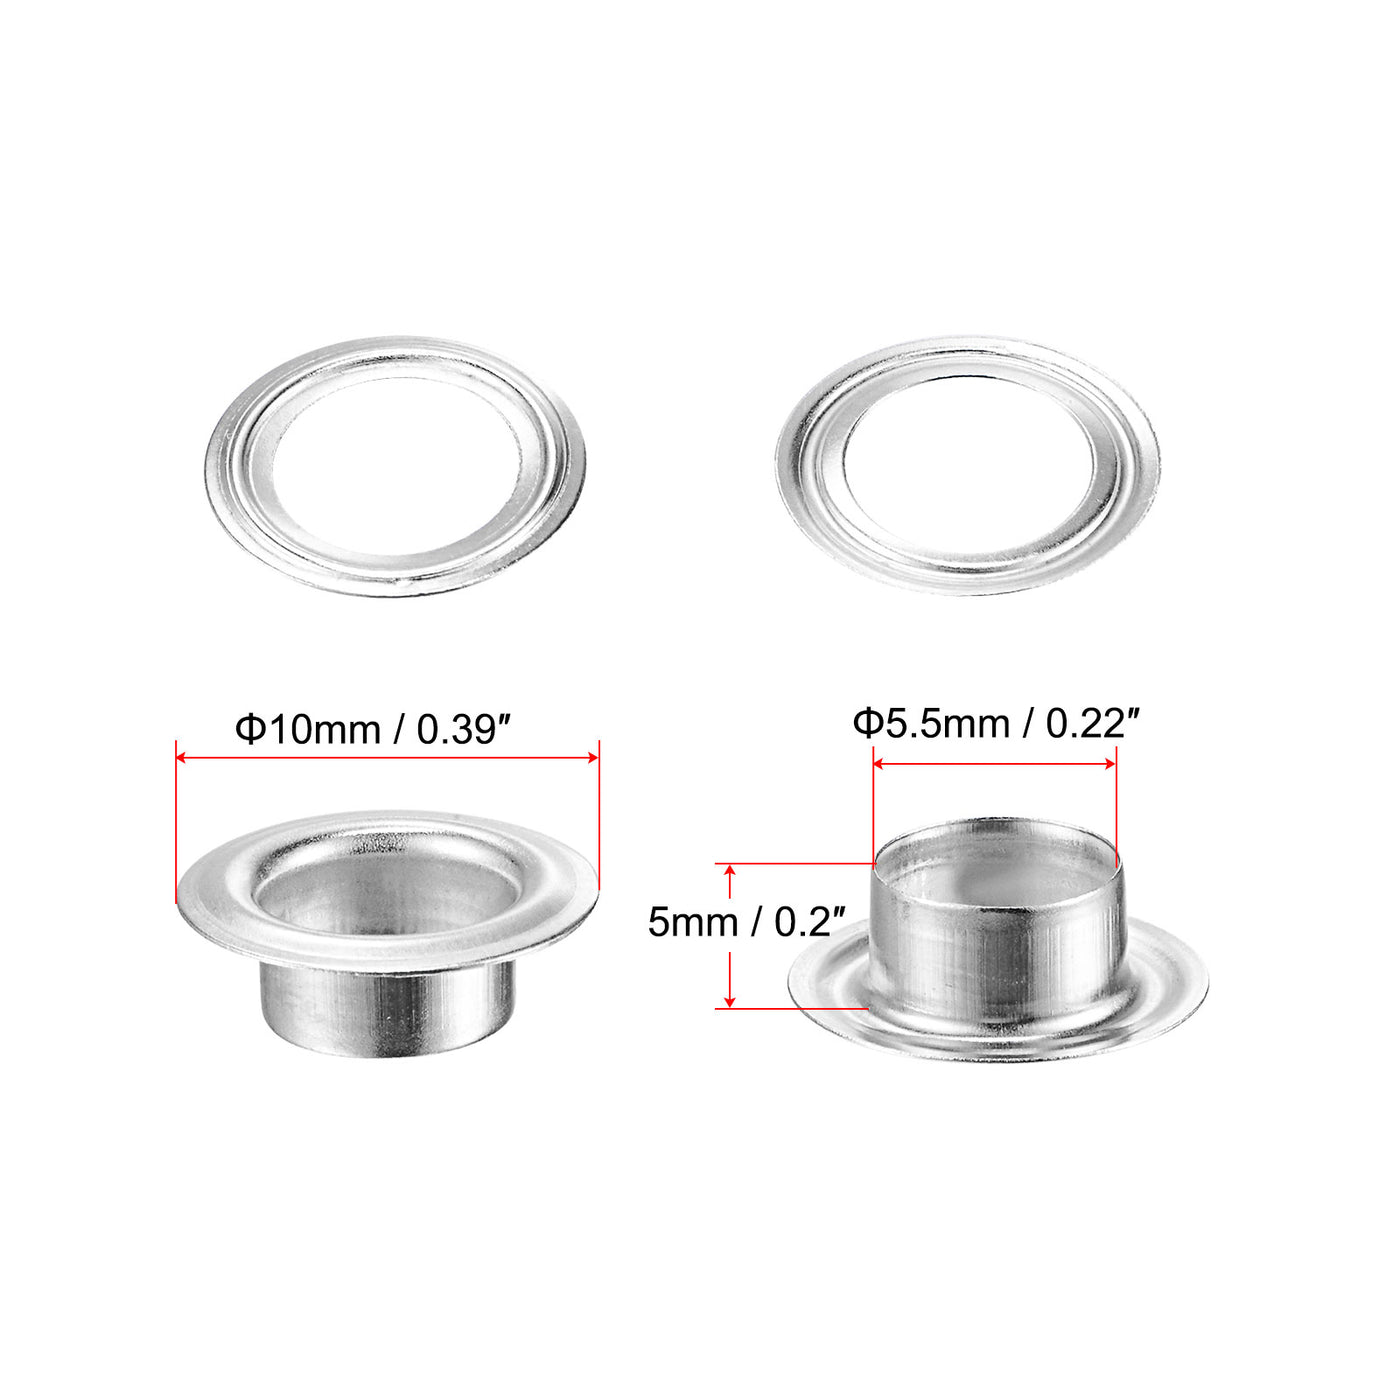 uxcell Uxcell 50Set 5.5mm Hole Copper Grommets Eyelets Silver Tone for Fabric Leather